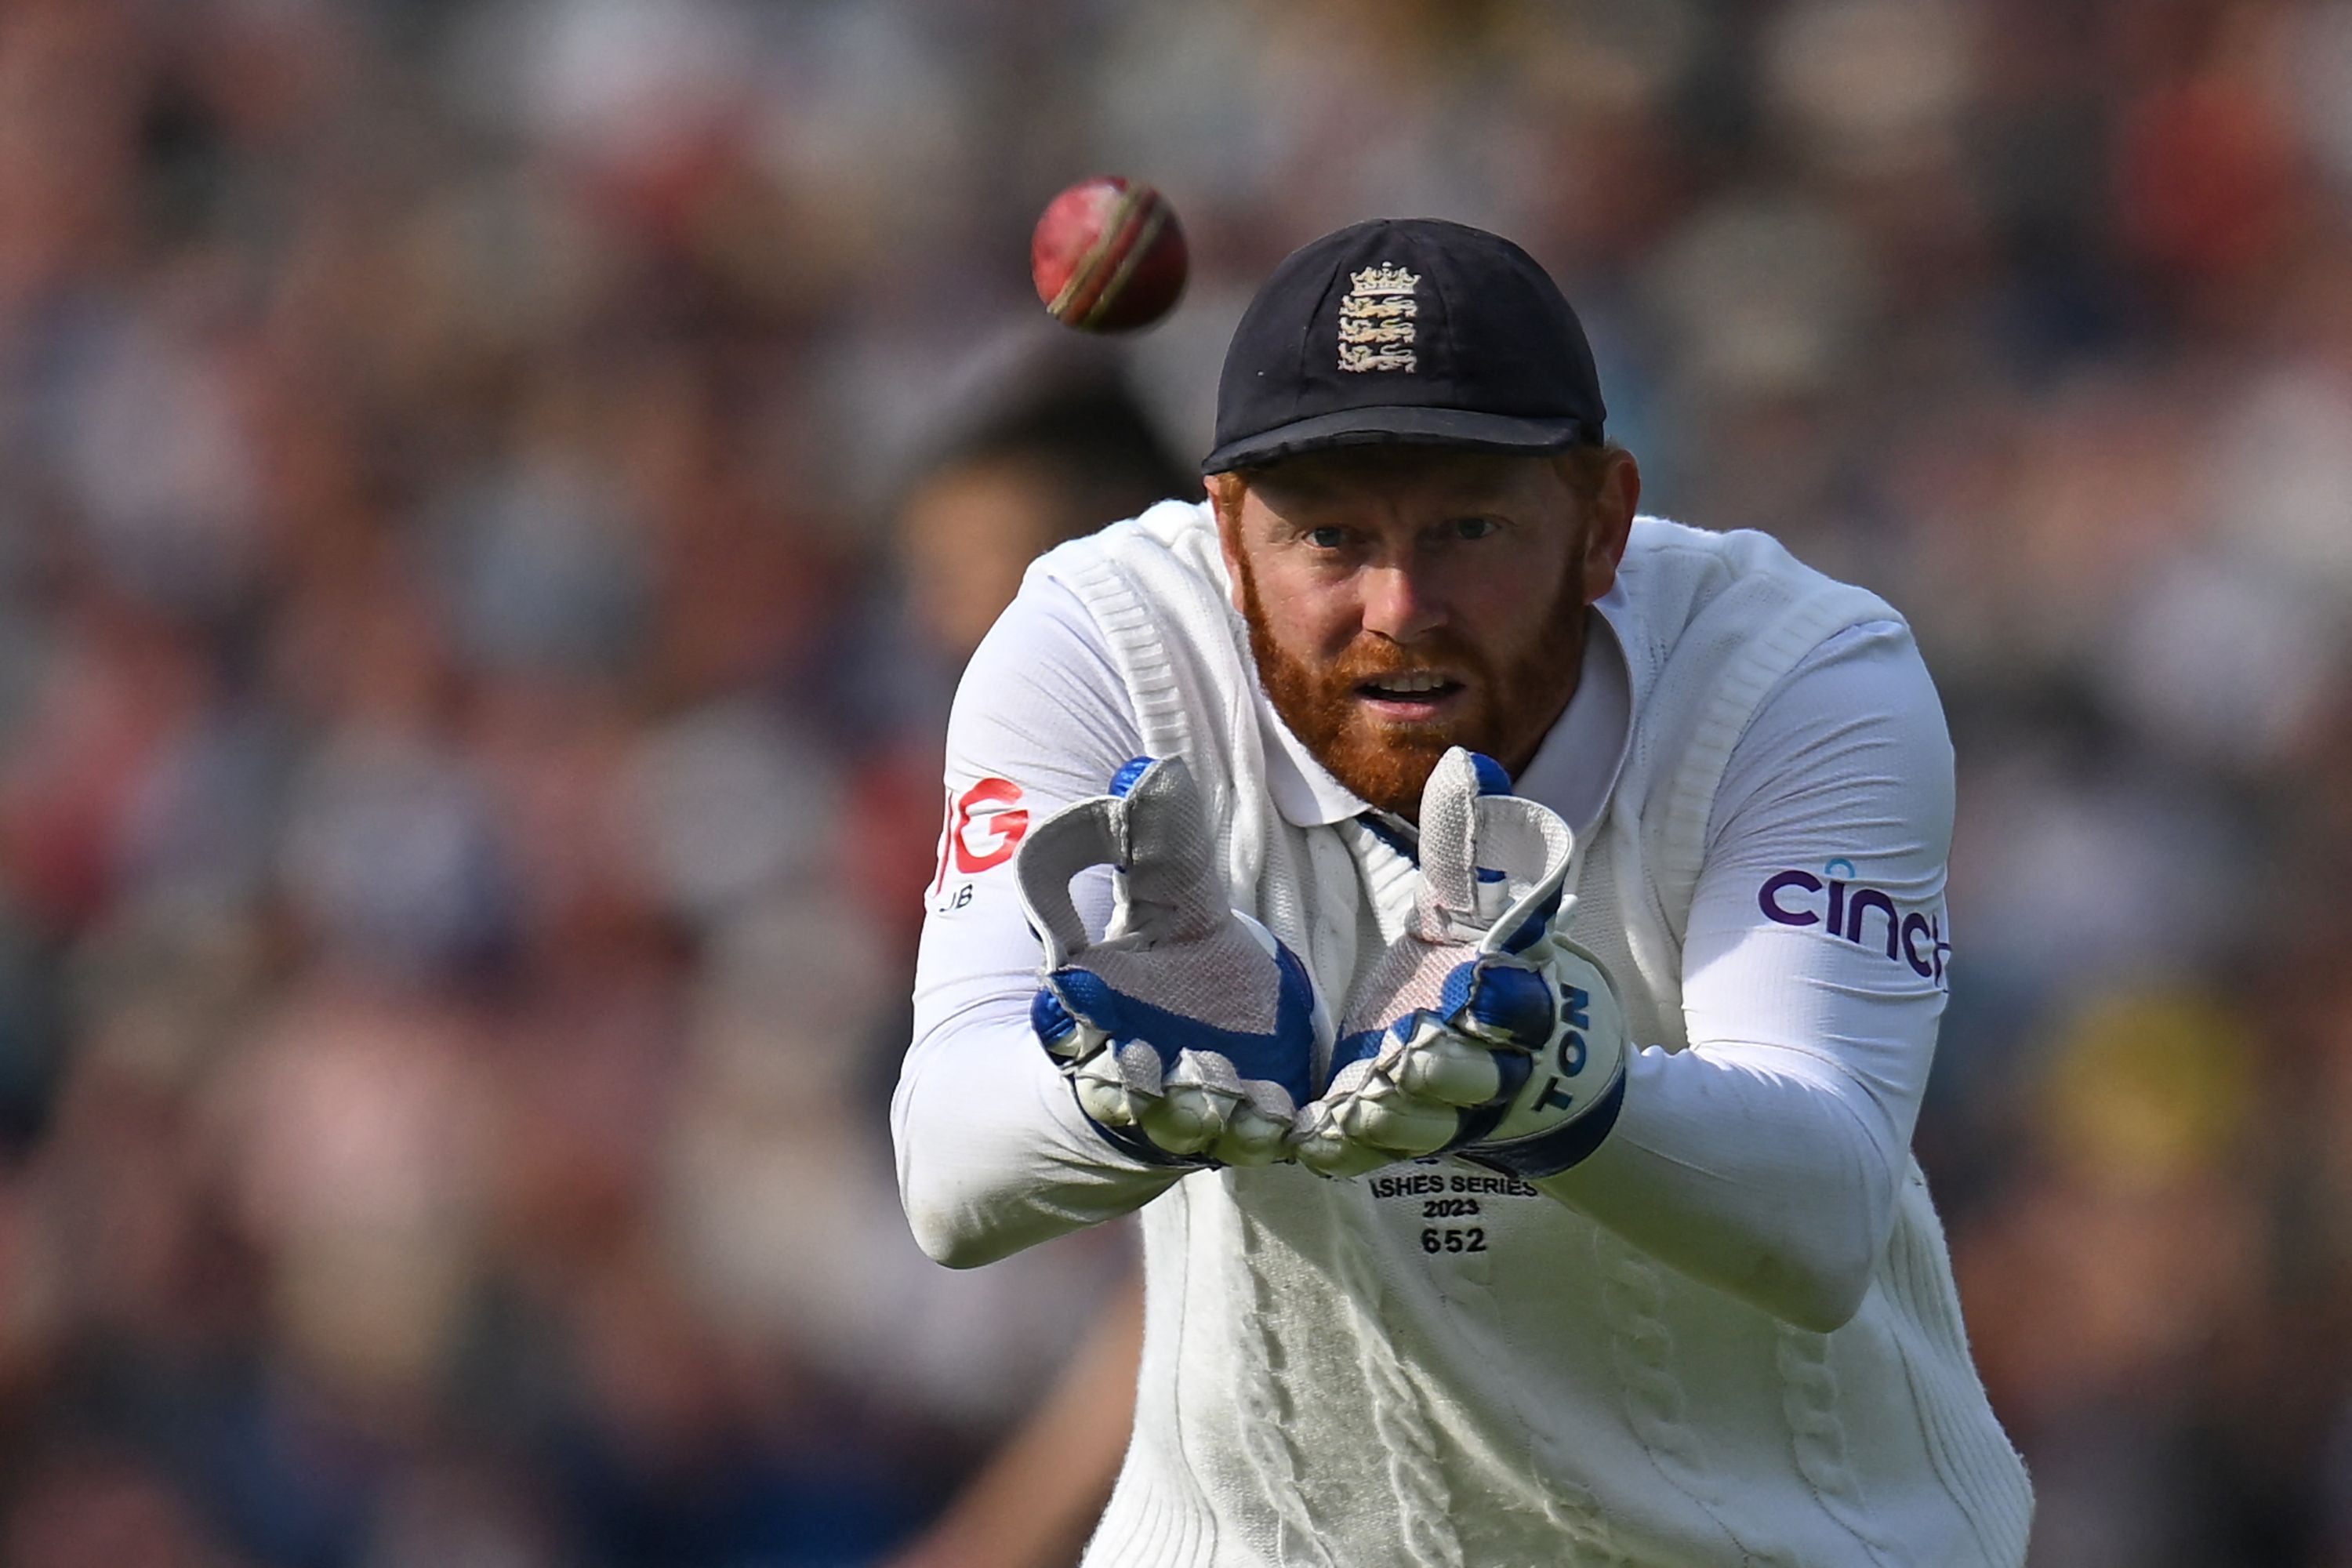 Jonny Bairstow has been under fire during the Ashes after making mistakes behind the stumps